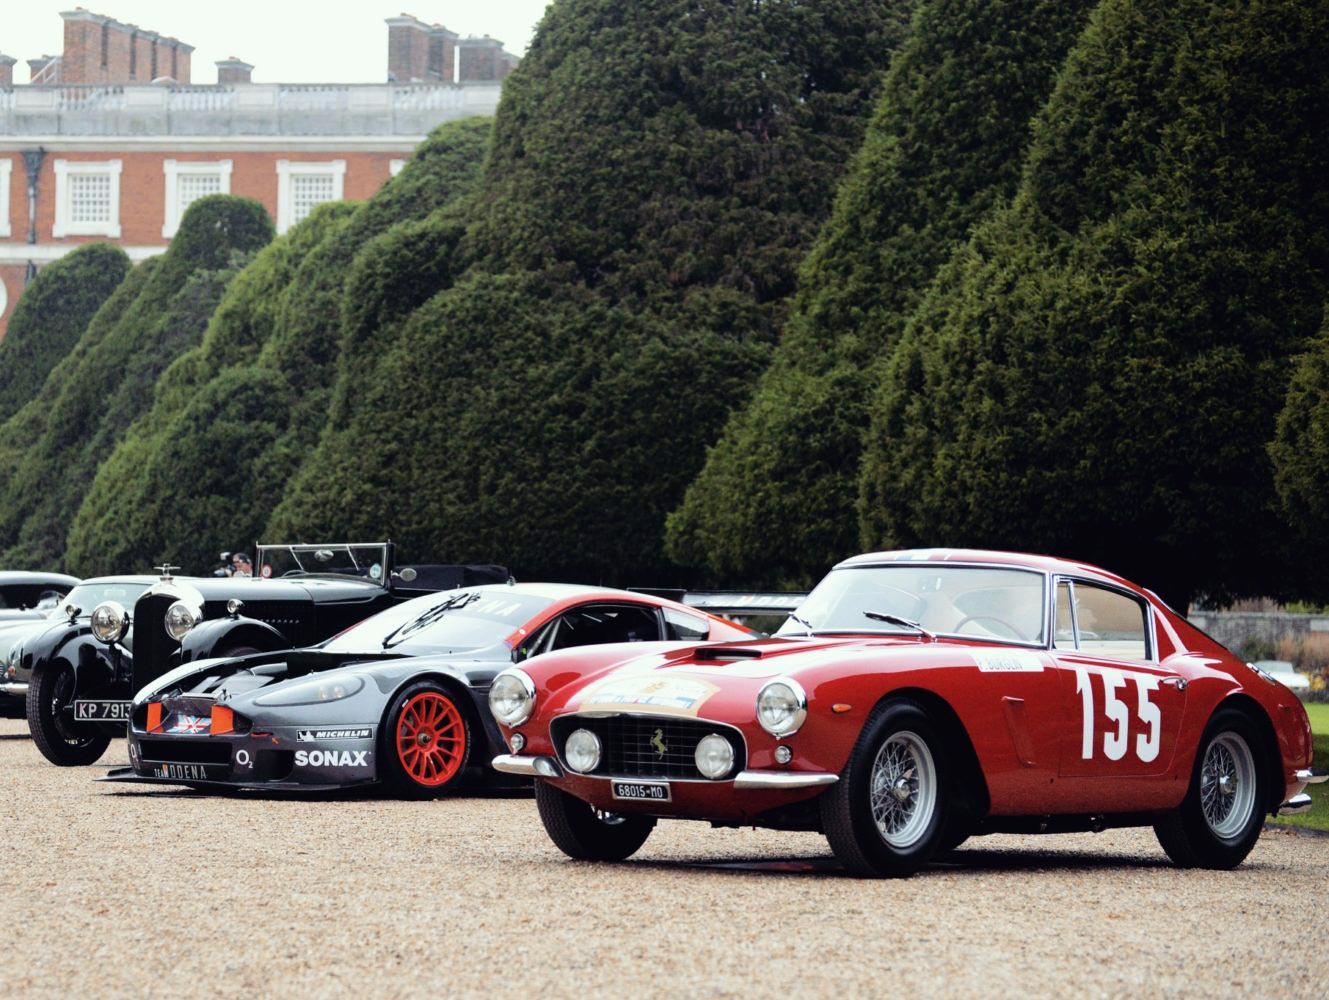 Concours of Elegance at Hampton Court Palace